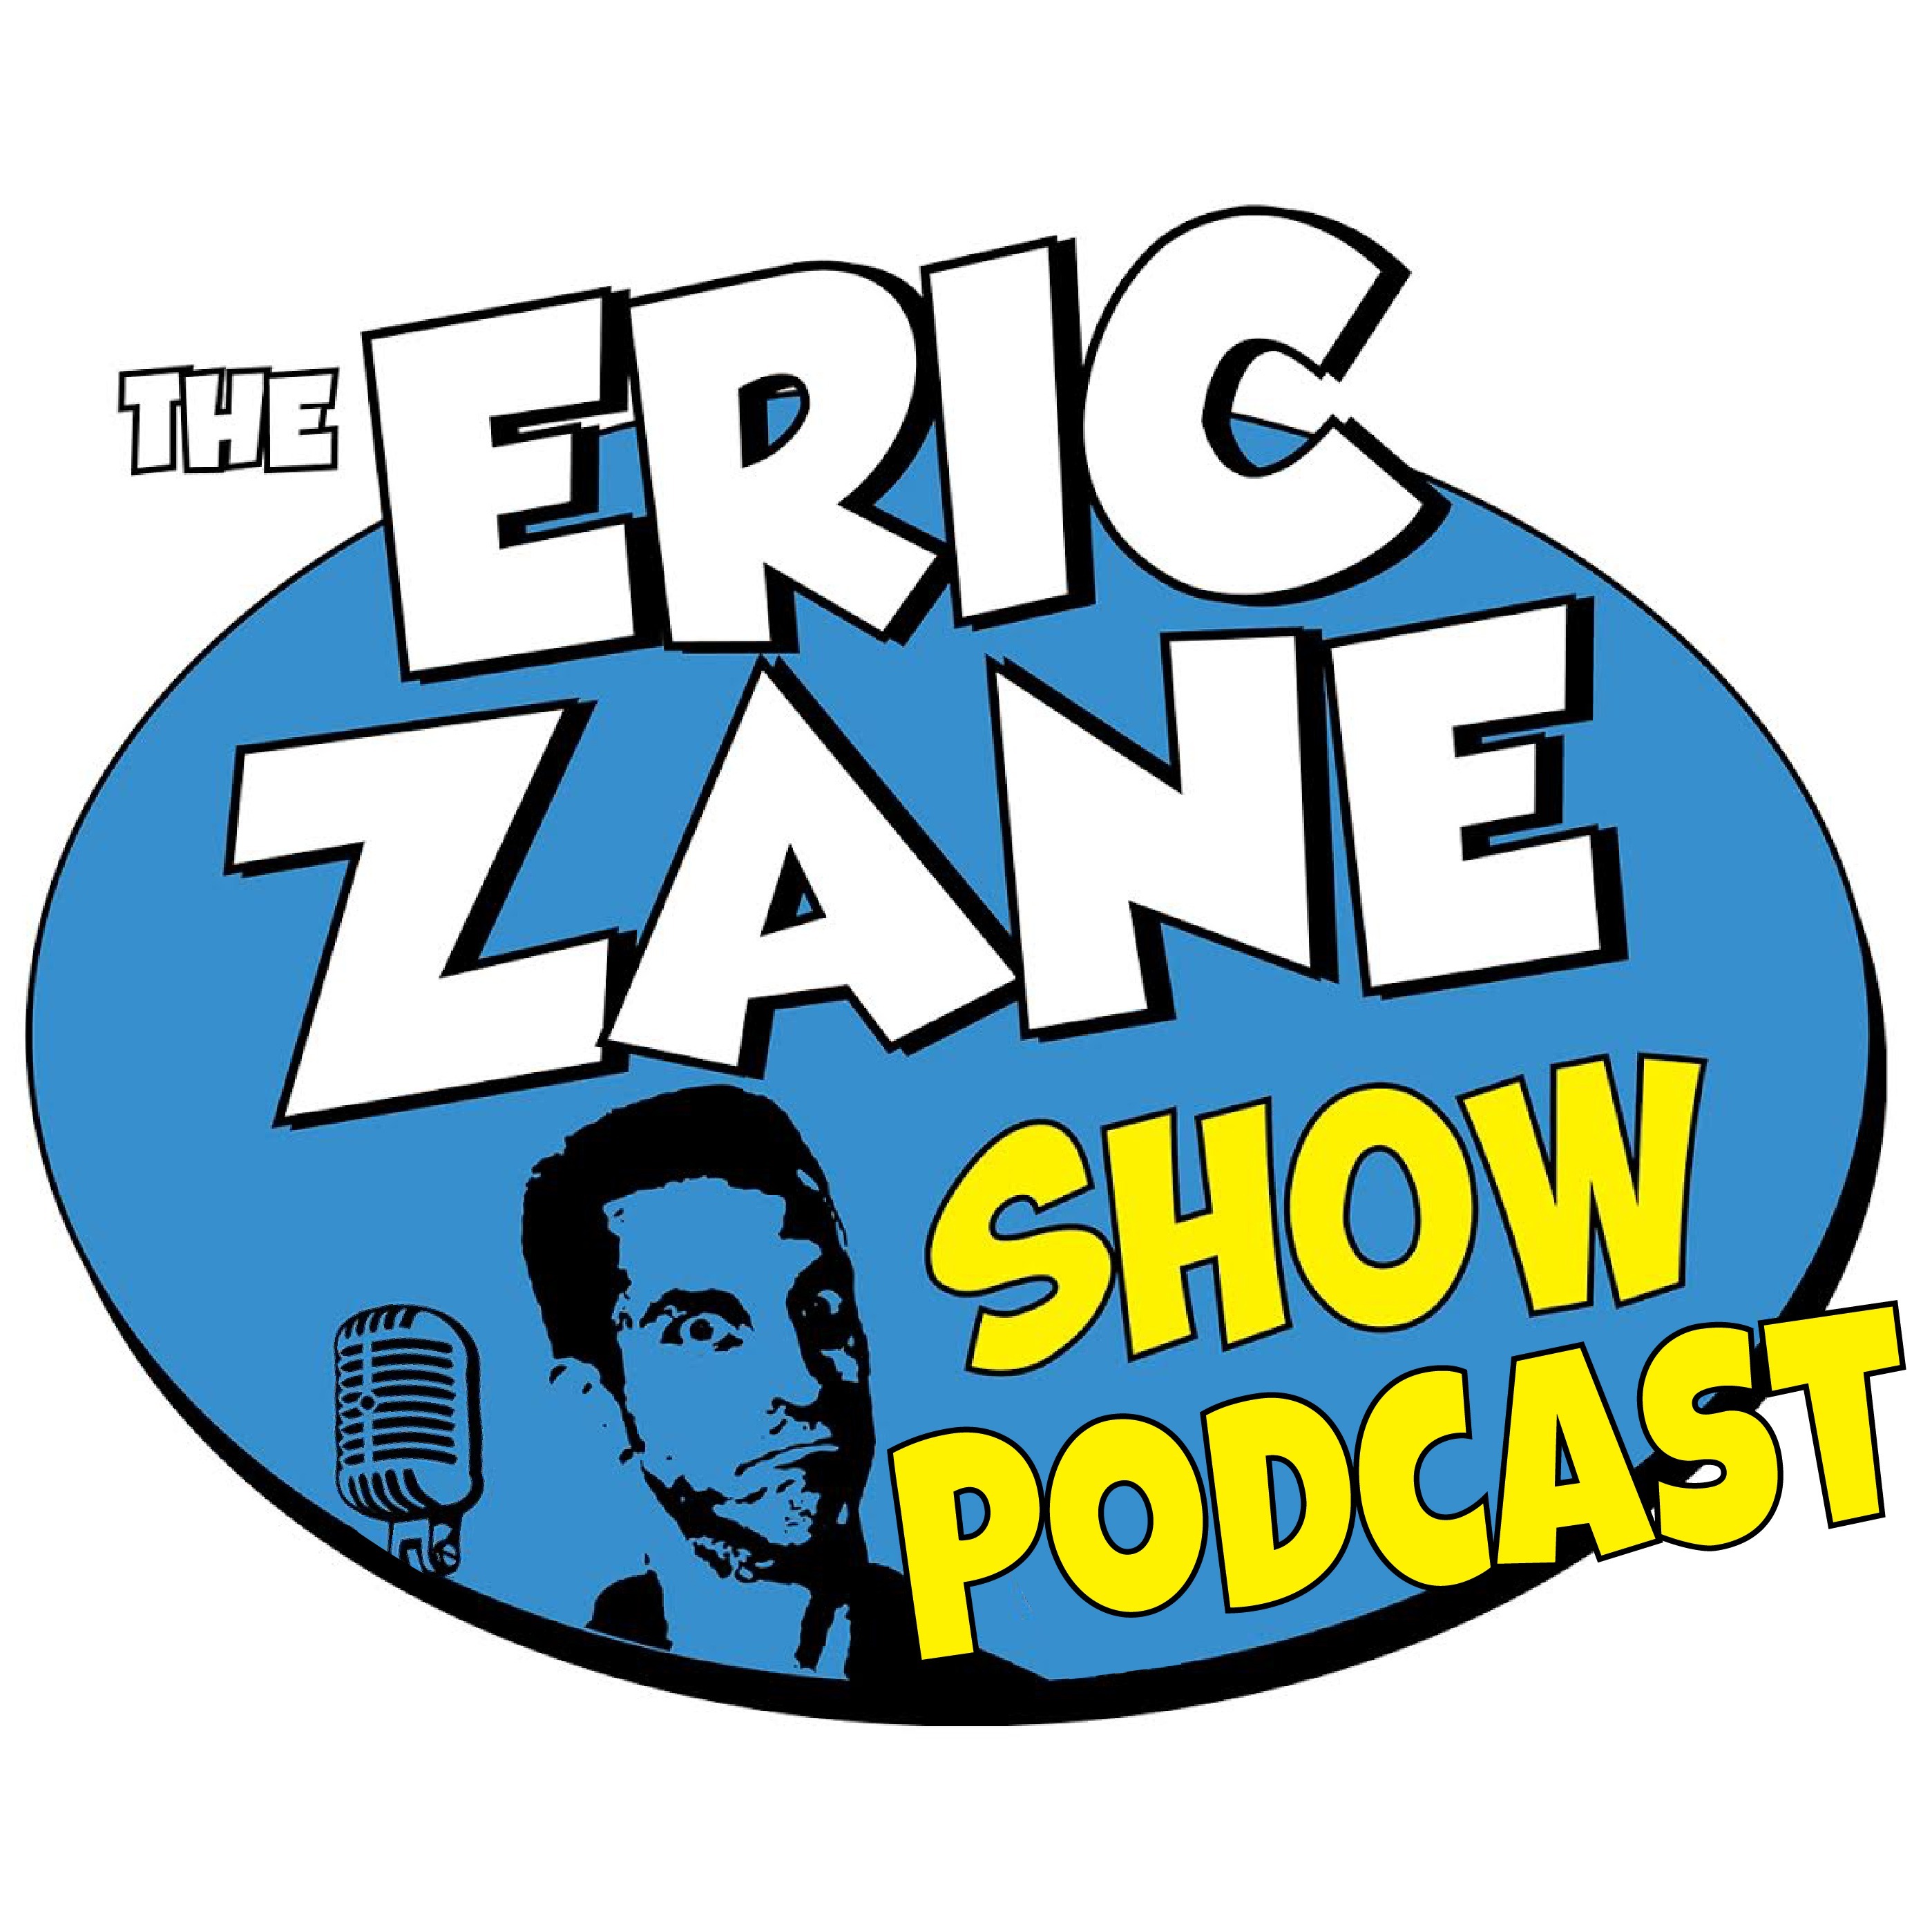 Eric Zane Show Podcast 1032 - Everyone lies to their parents